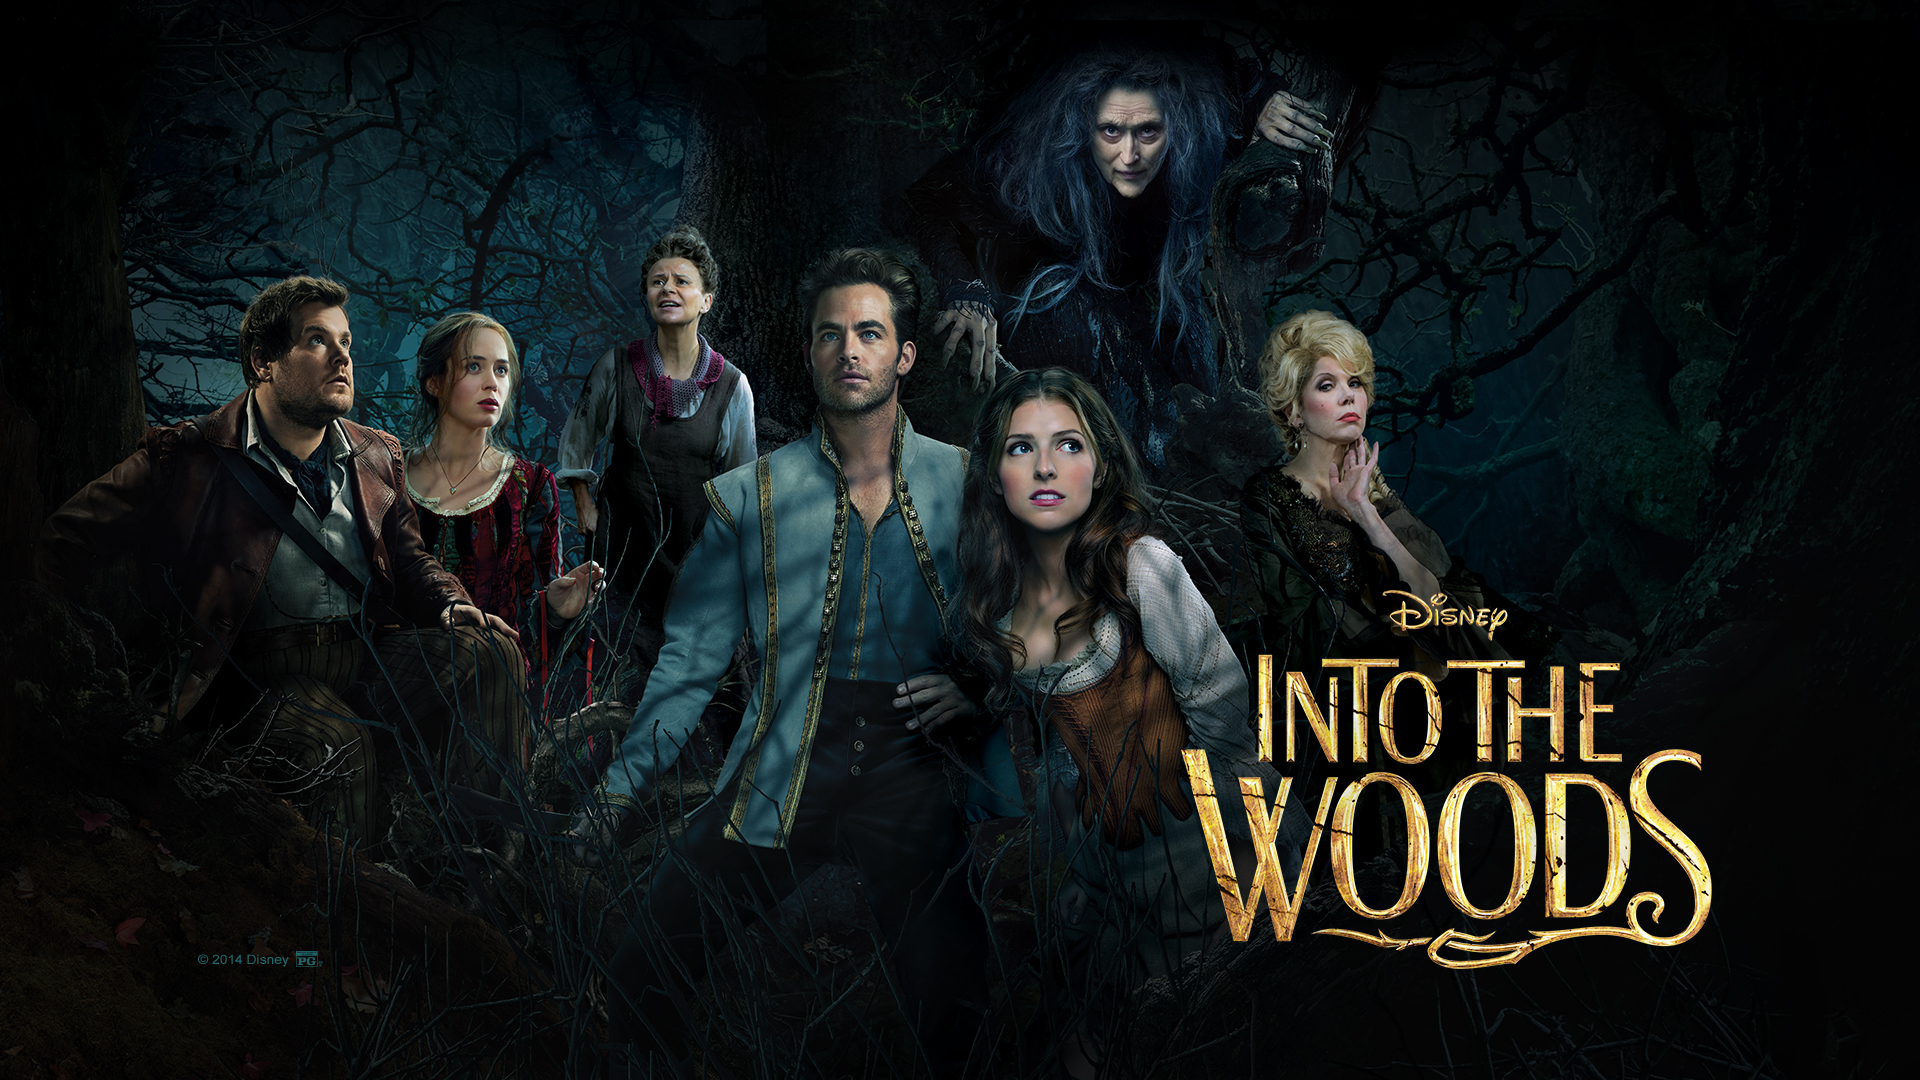 into-the-woods-movie-review-85971c0d-c48e-4bf1-8ff5-188cae9cb4a1.jpeg